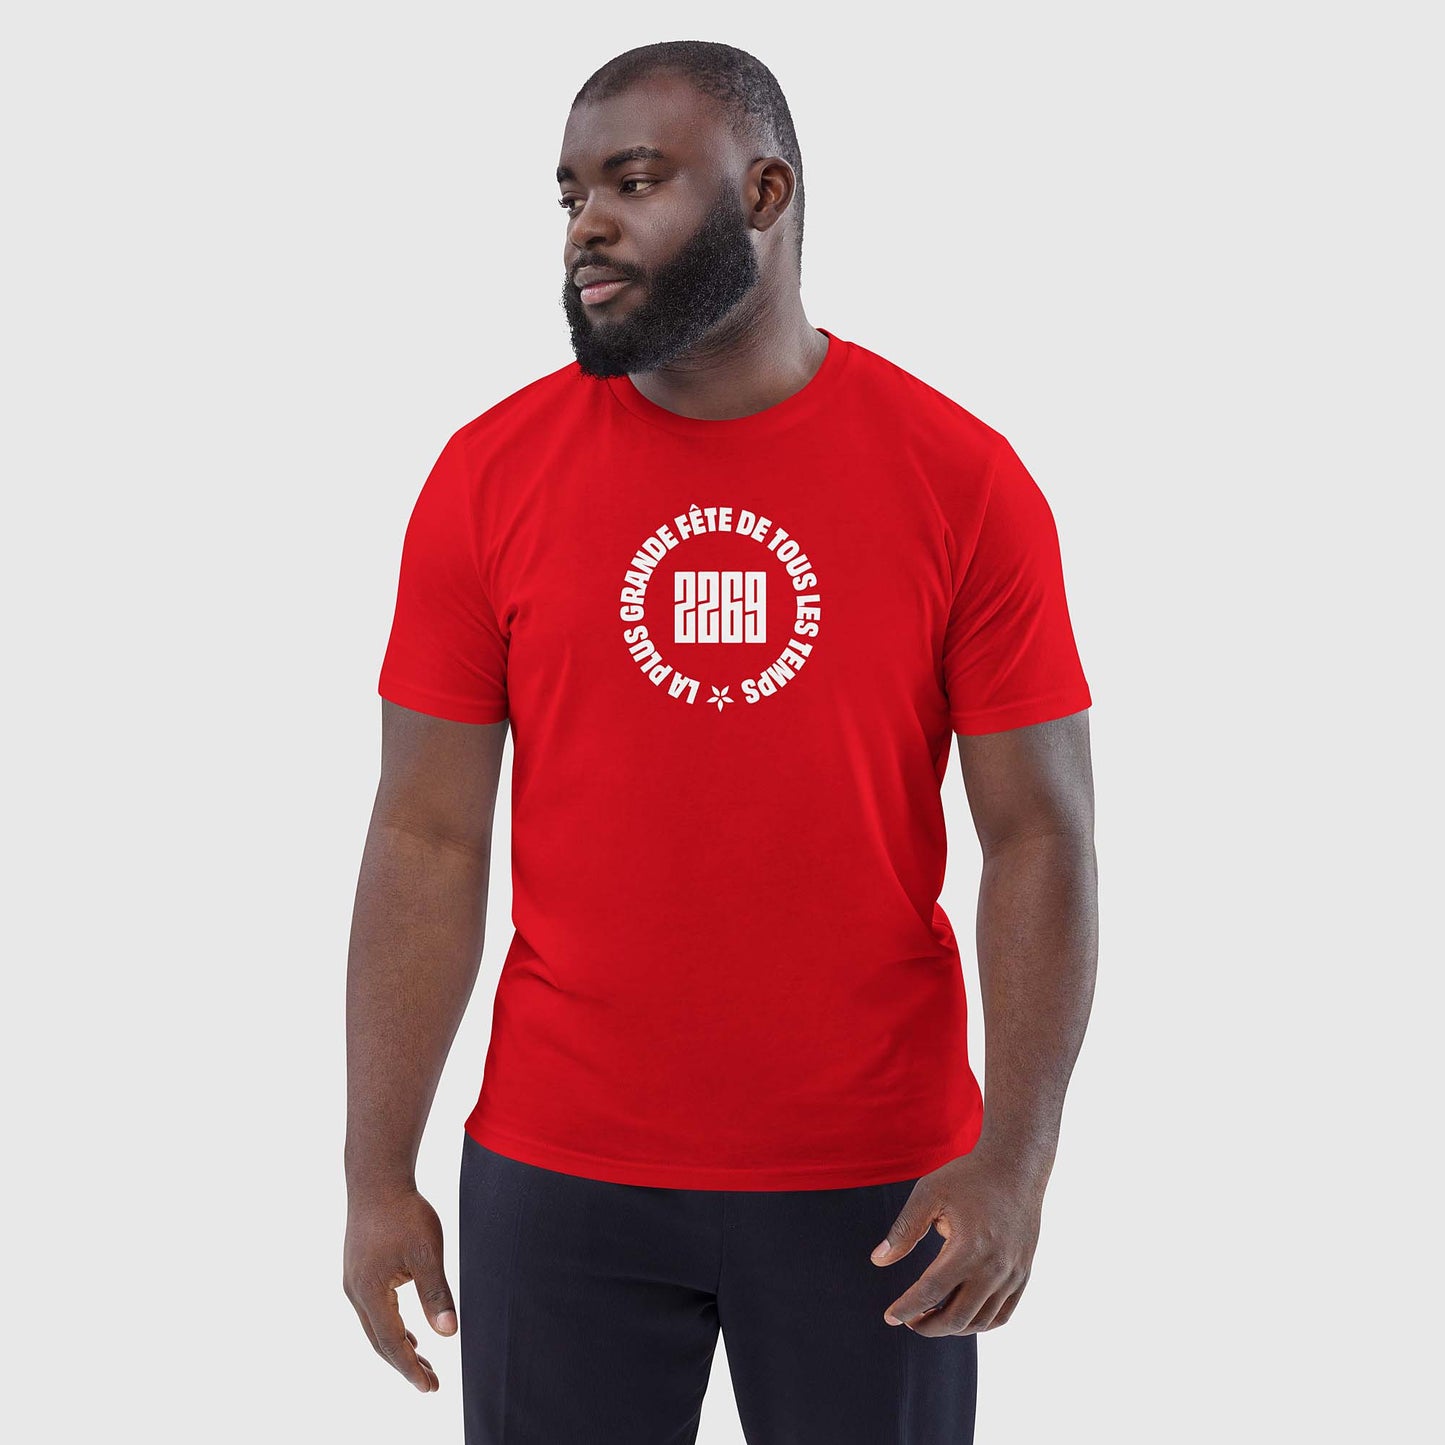 Men's red organic cotton t-shirt with French 2269 party circle